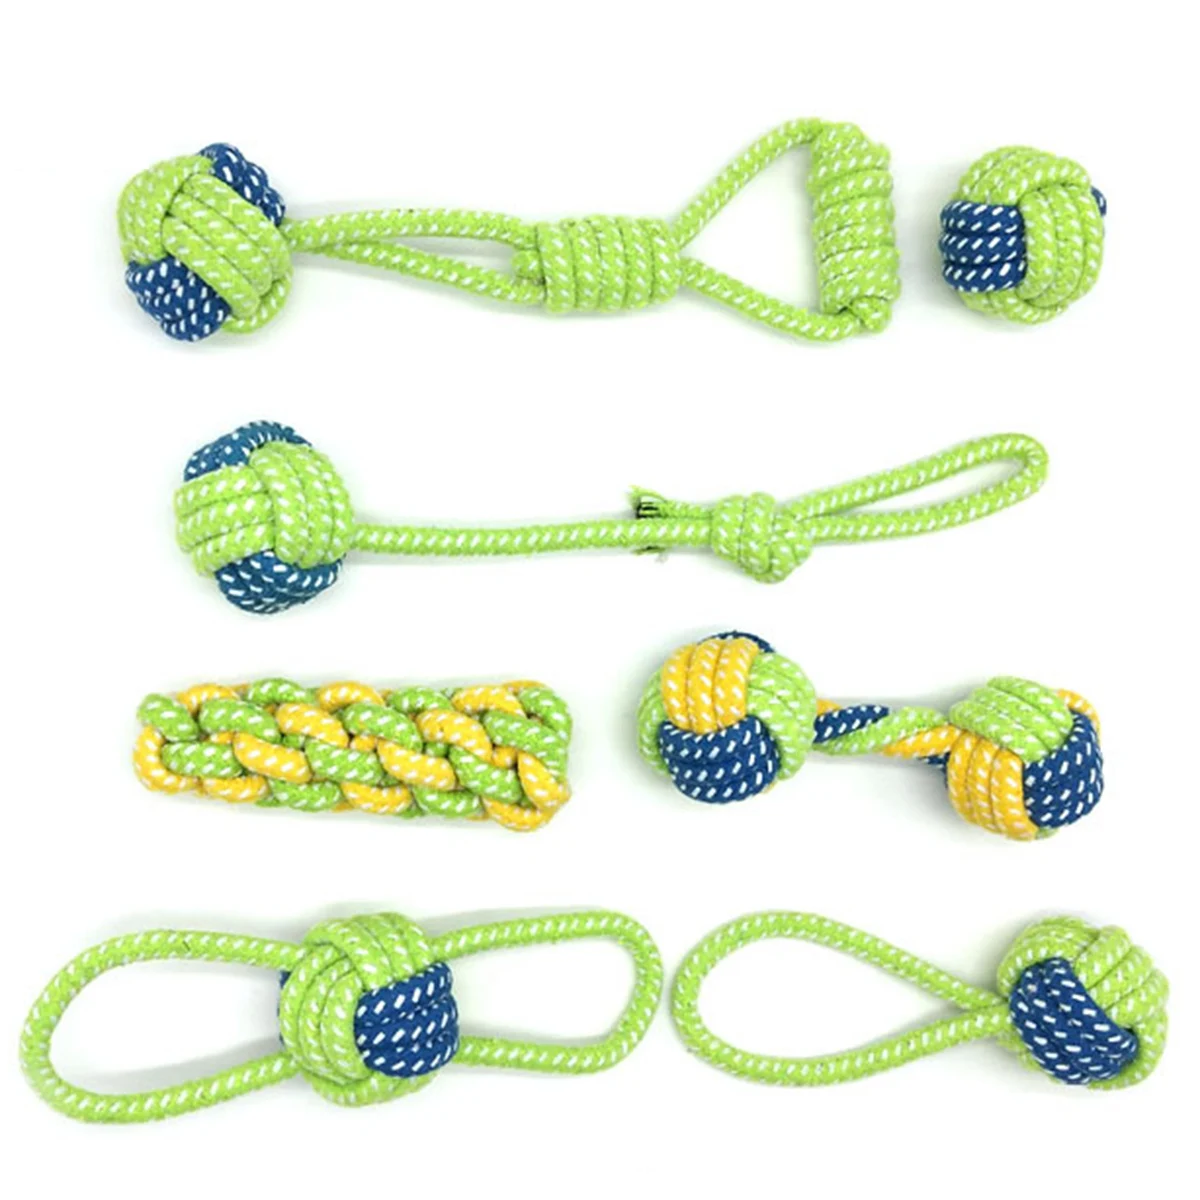 

7pcs/set different shapes Dog Rope Toys Tough Cotton Rope wear-resistant durable Pet Dogs Teeth Cleaning Chew Toy Green